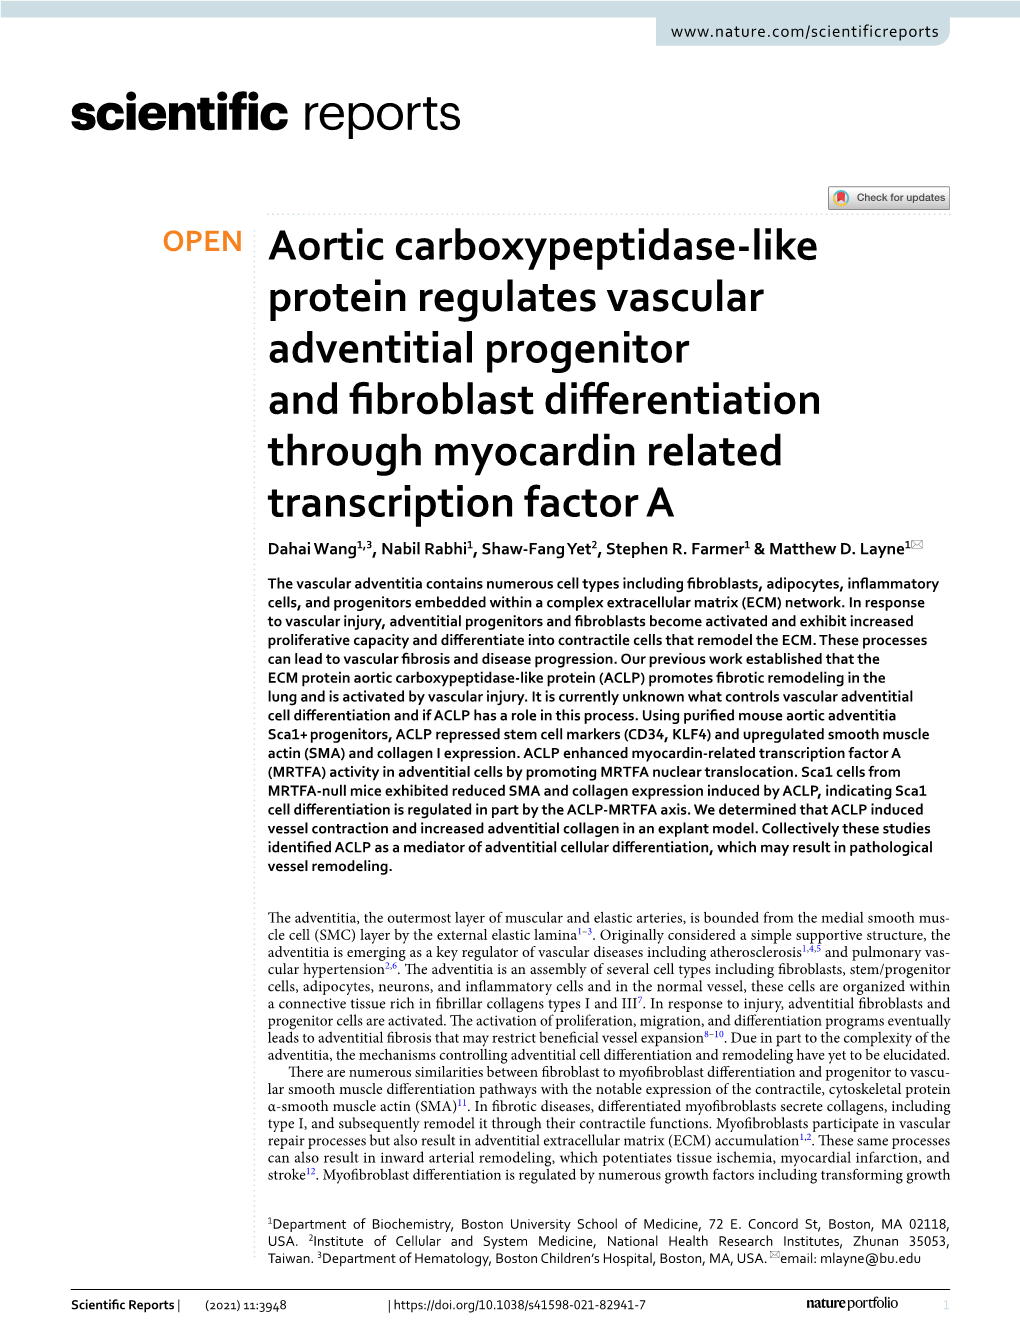 Aortic Carboxypeptidase-Like Protein Regulates Vascular Adventitial